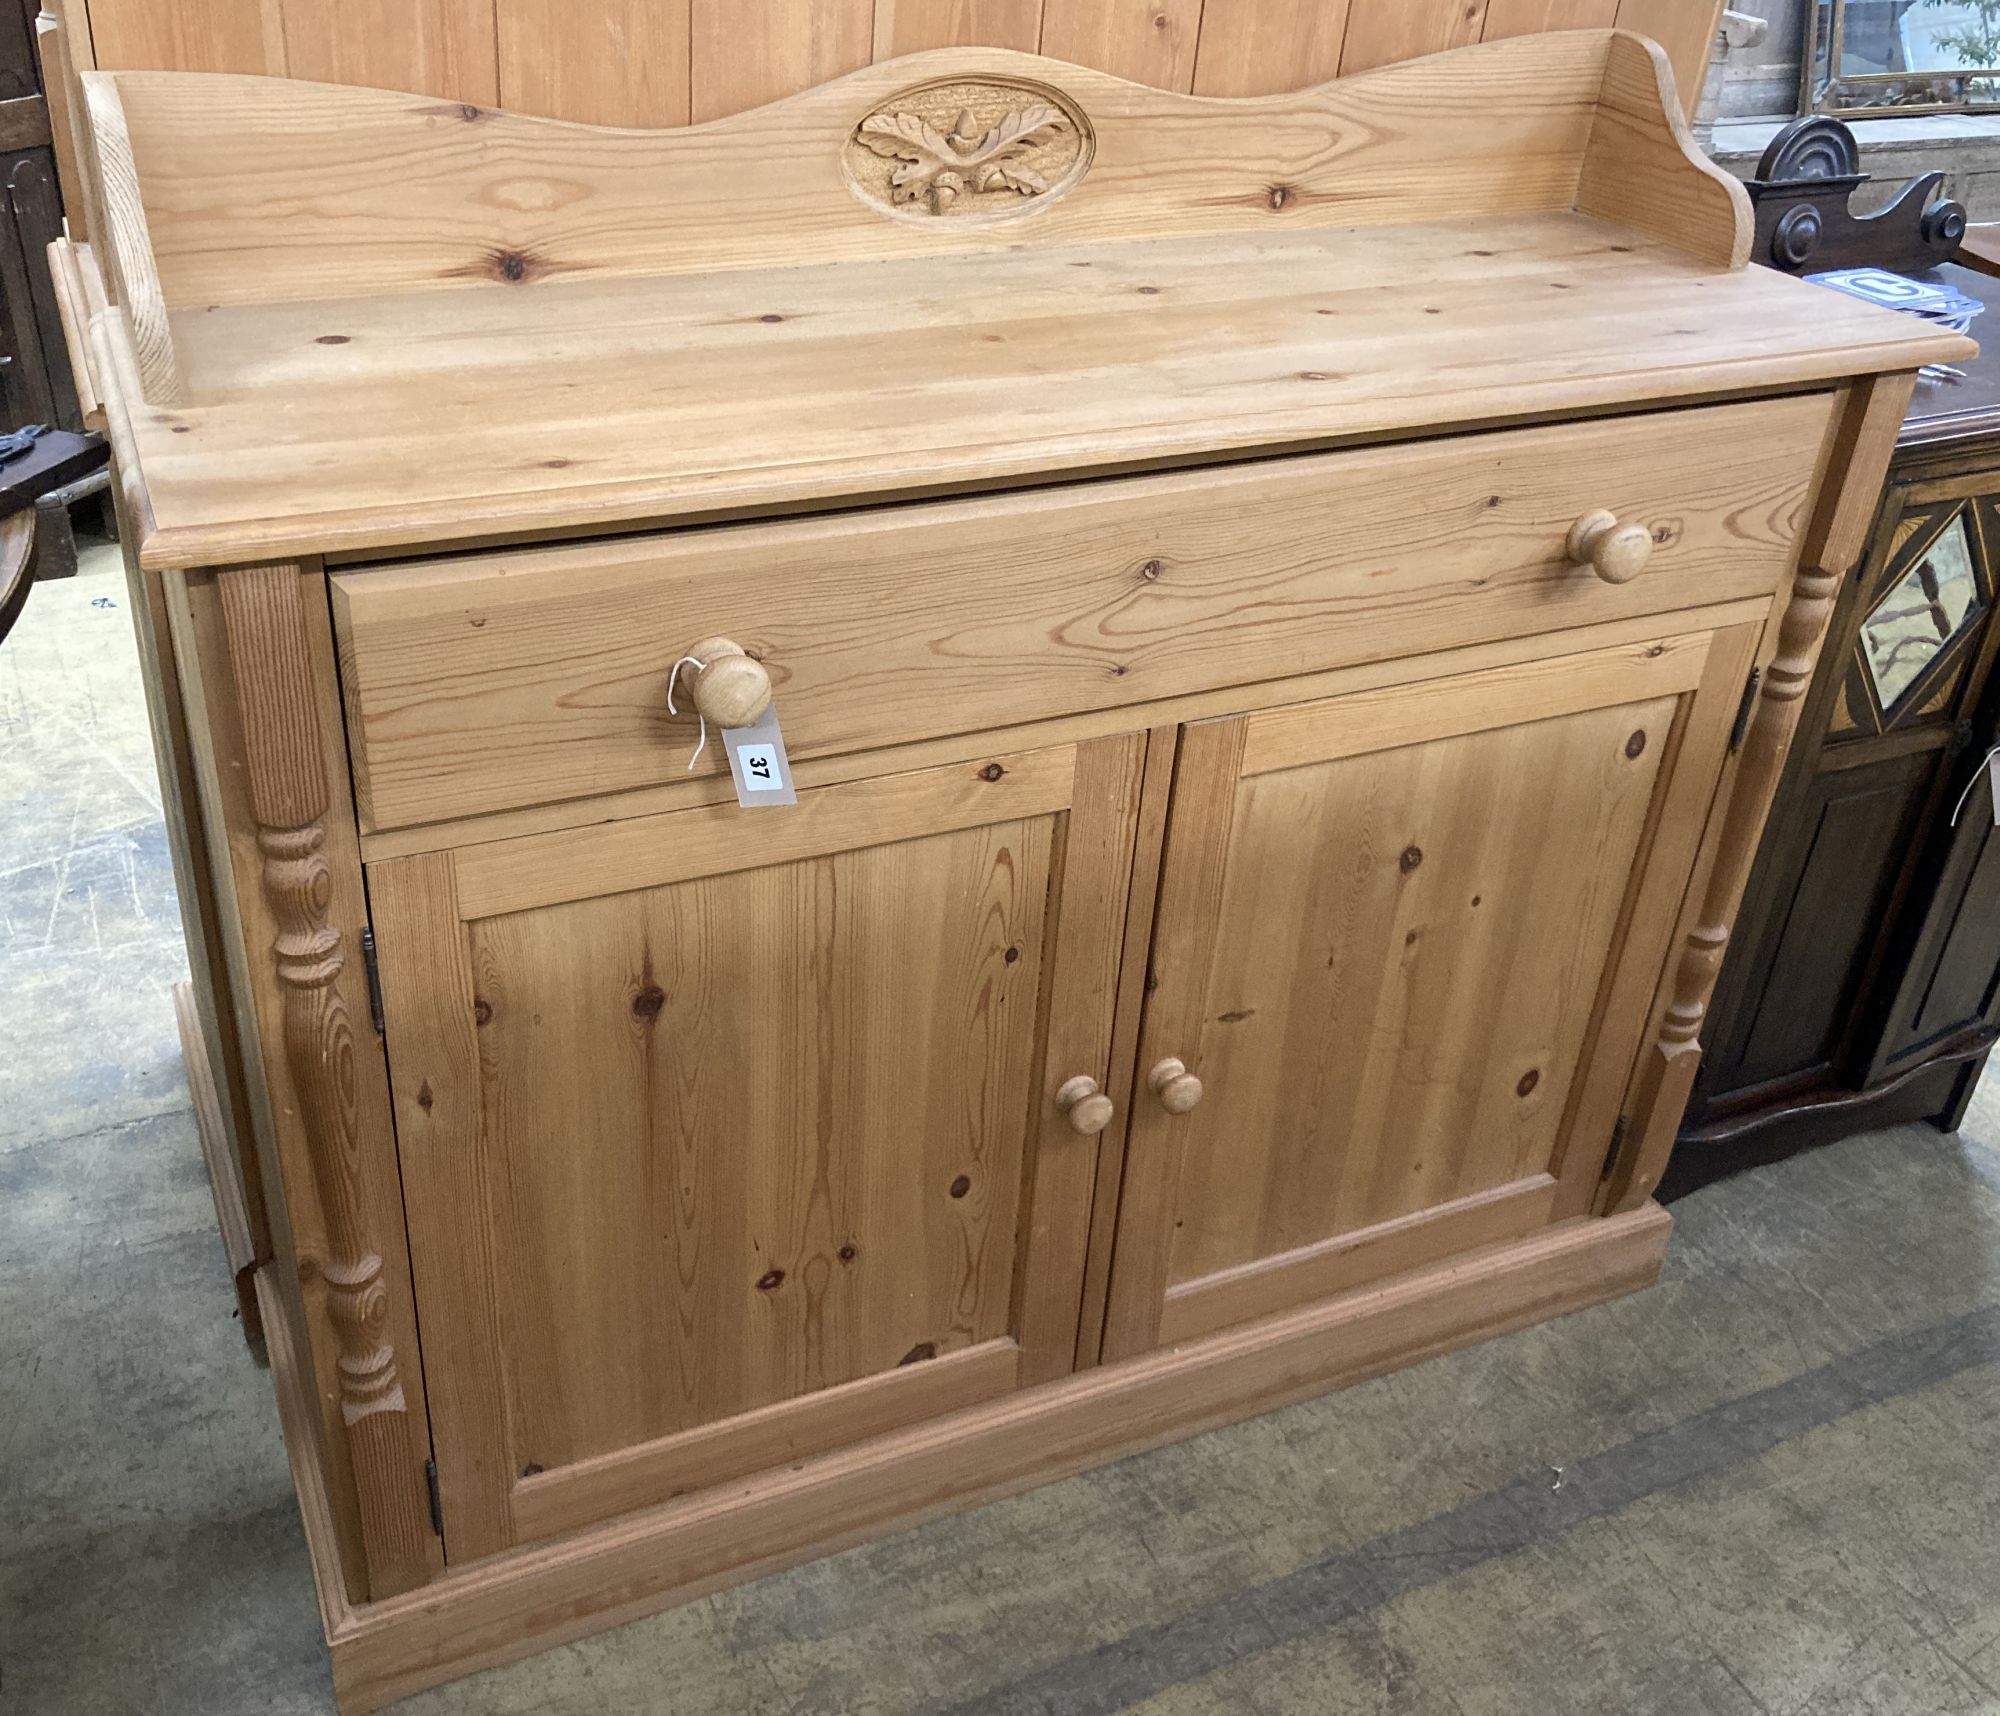 A reproduction pine sideboard, length 122cm, depth 40cm, height 106cm